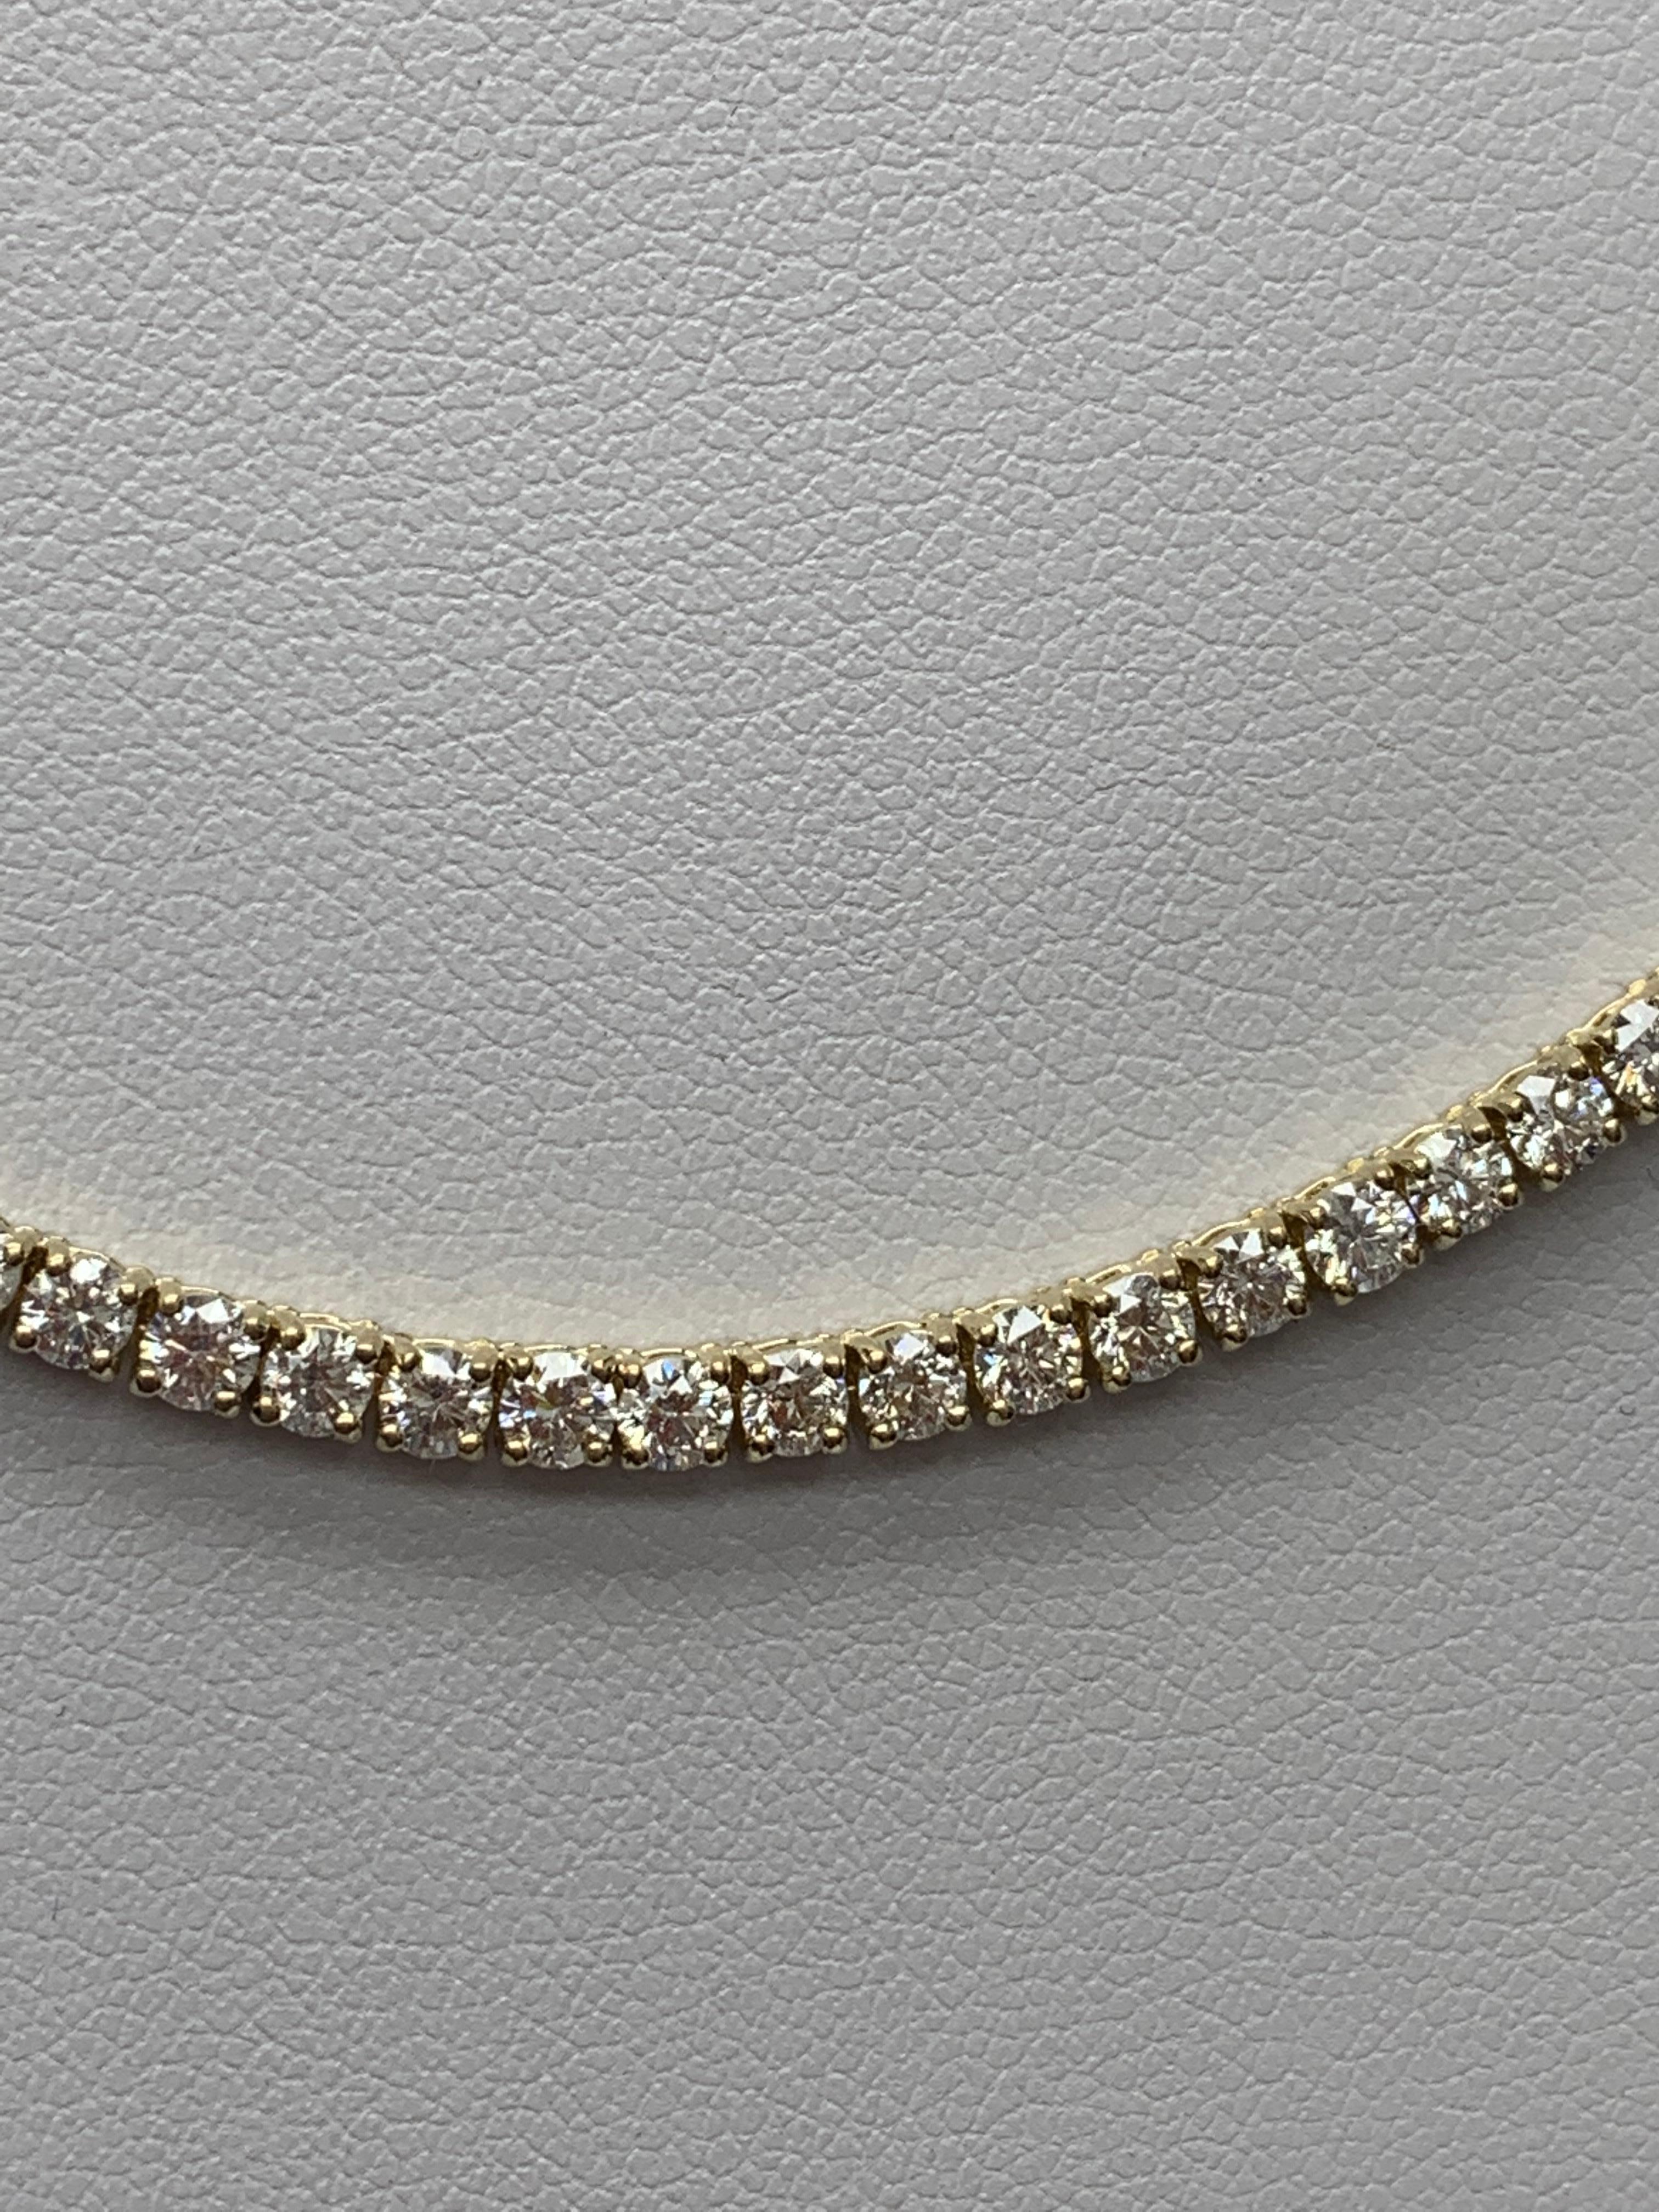 11.31 Carat Diamond Tennis Necklace in 14K Yellow Gold In New Condition For Sale In NEW YORK, NY